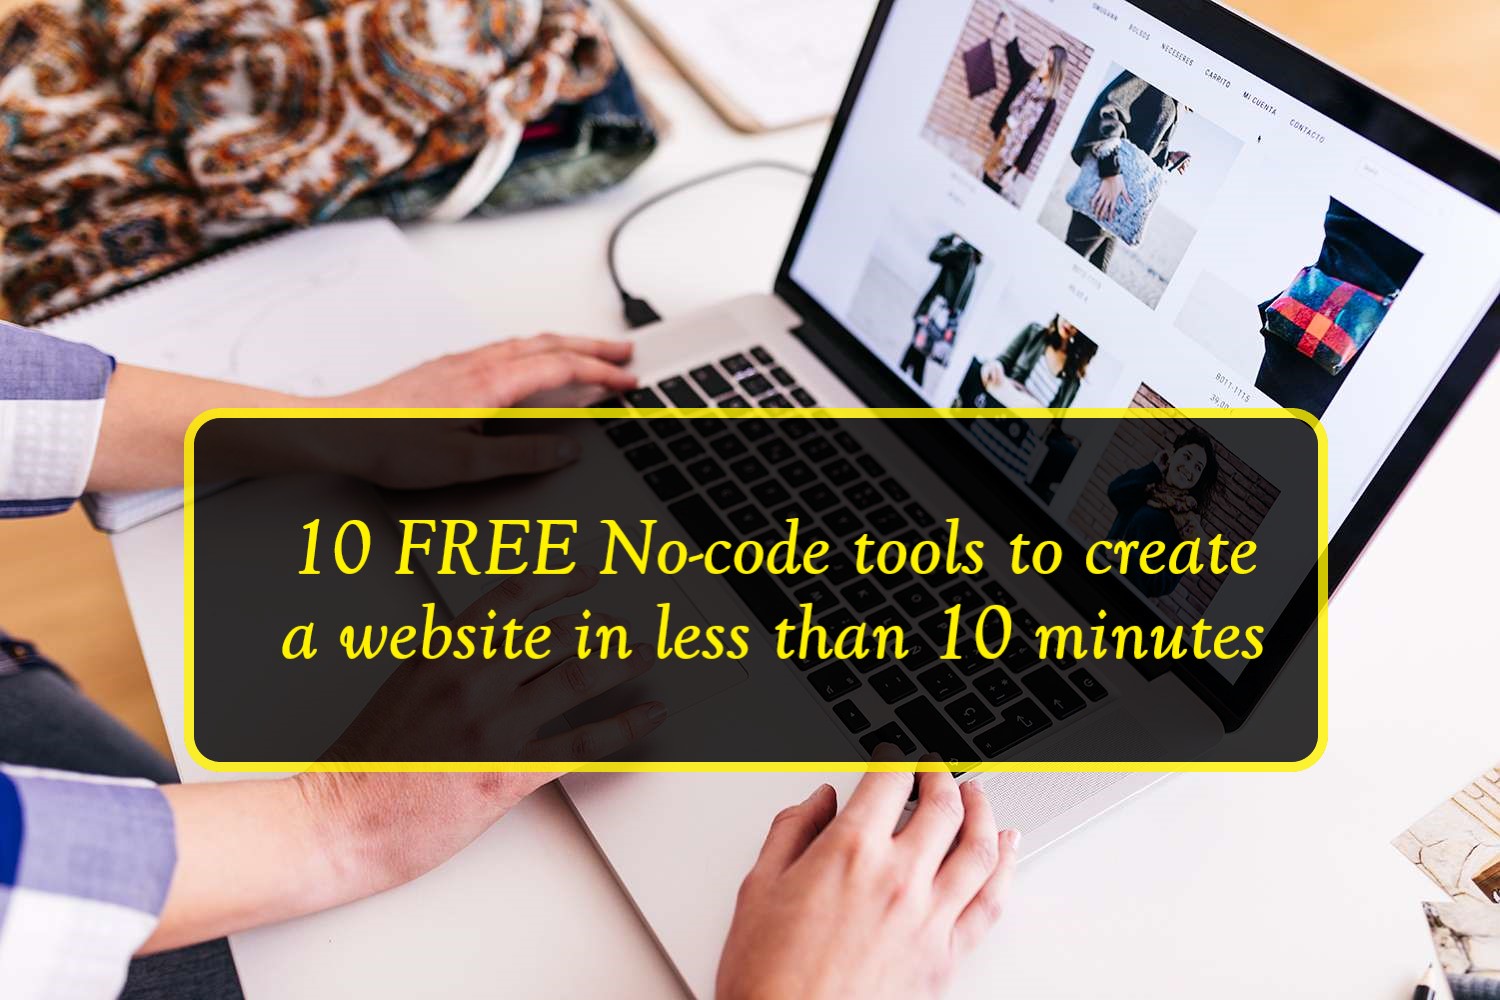 10 FREE No-code tools to create a website in less than 10 minutes